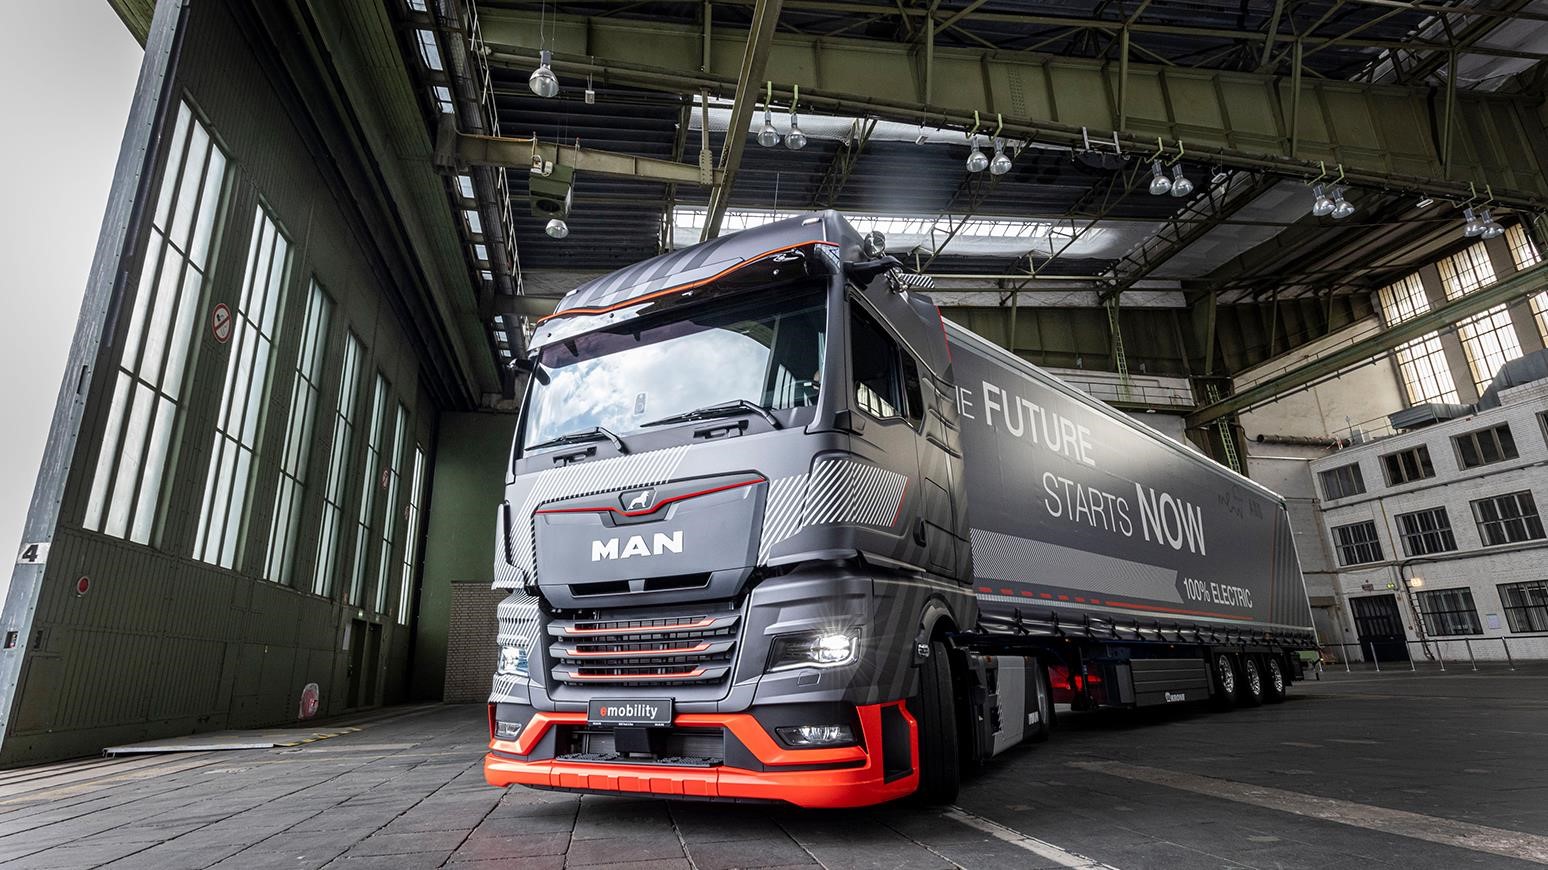 MAN Prototype Electric Truck Makes First Public Appearance, ABB E-mobility Promotes Megawatt Charging